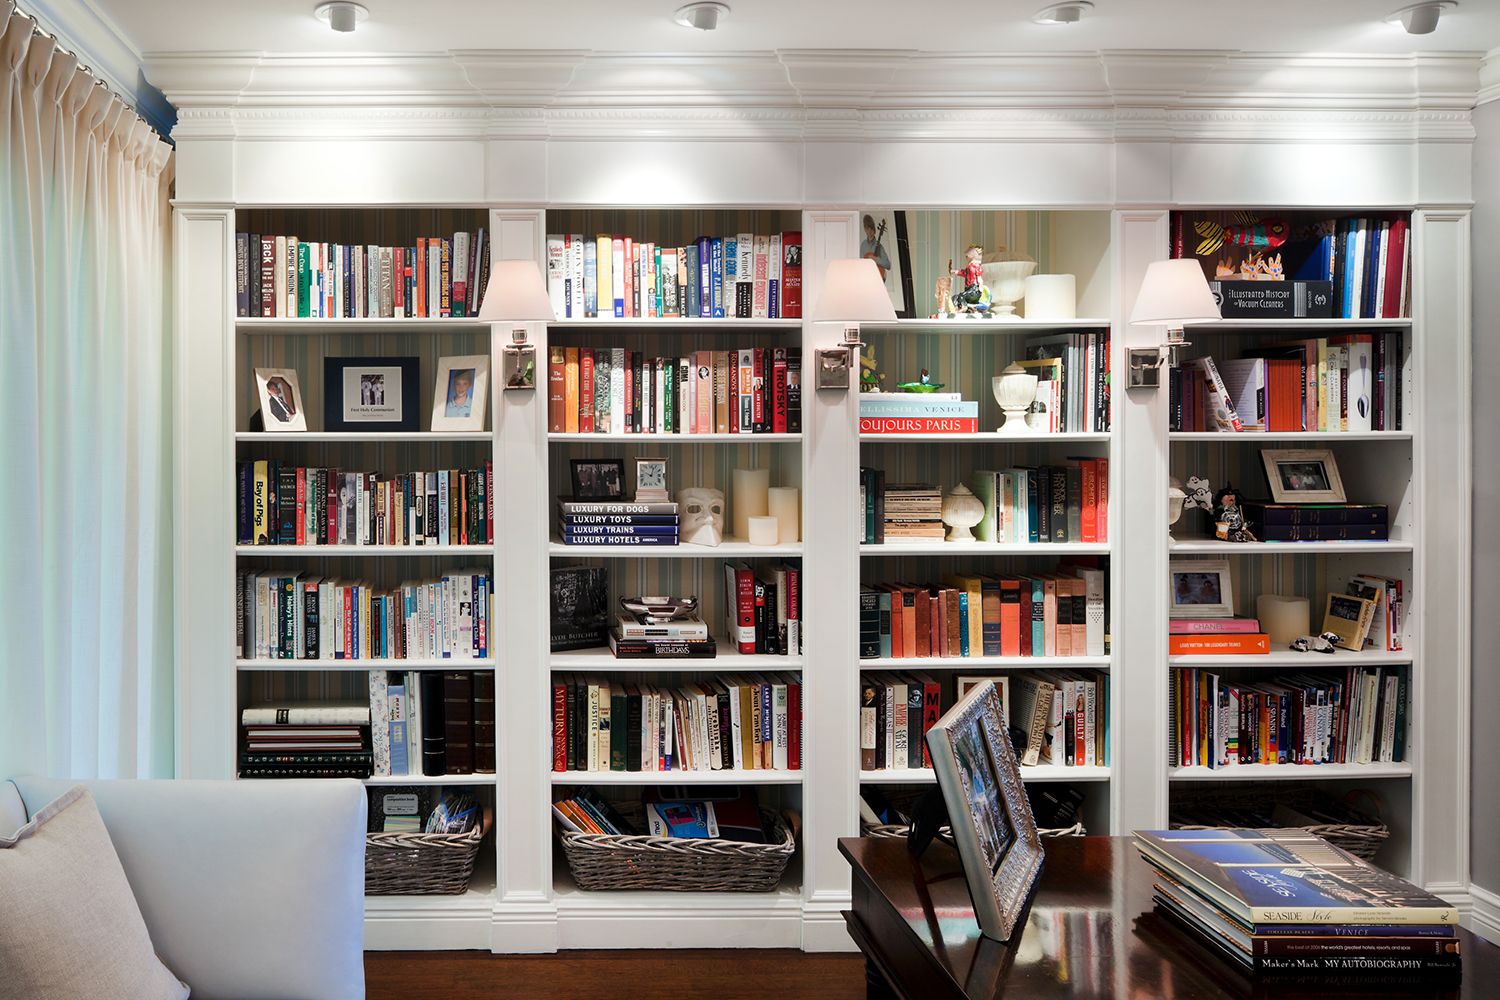 15 stunning bookshelf ideas for every room in your house - C